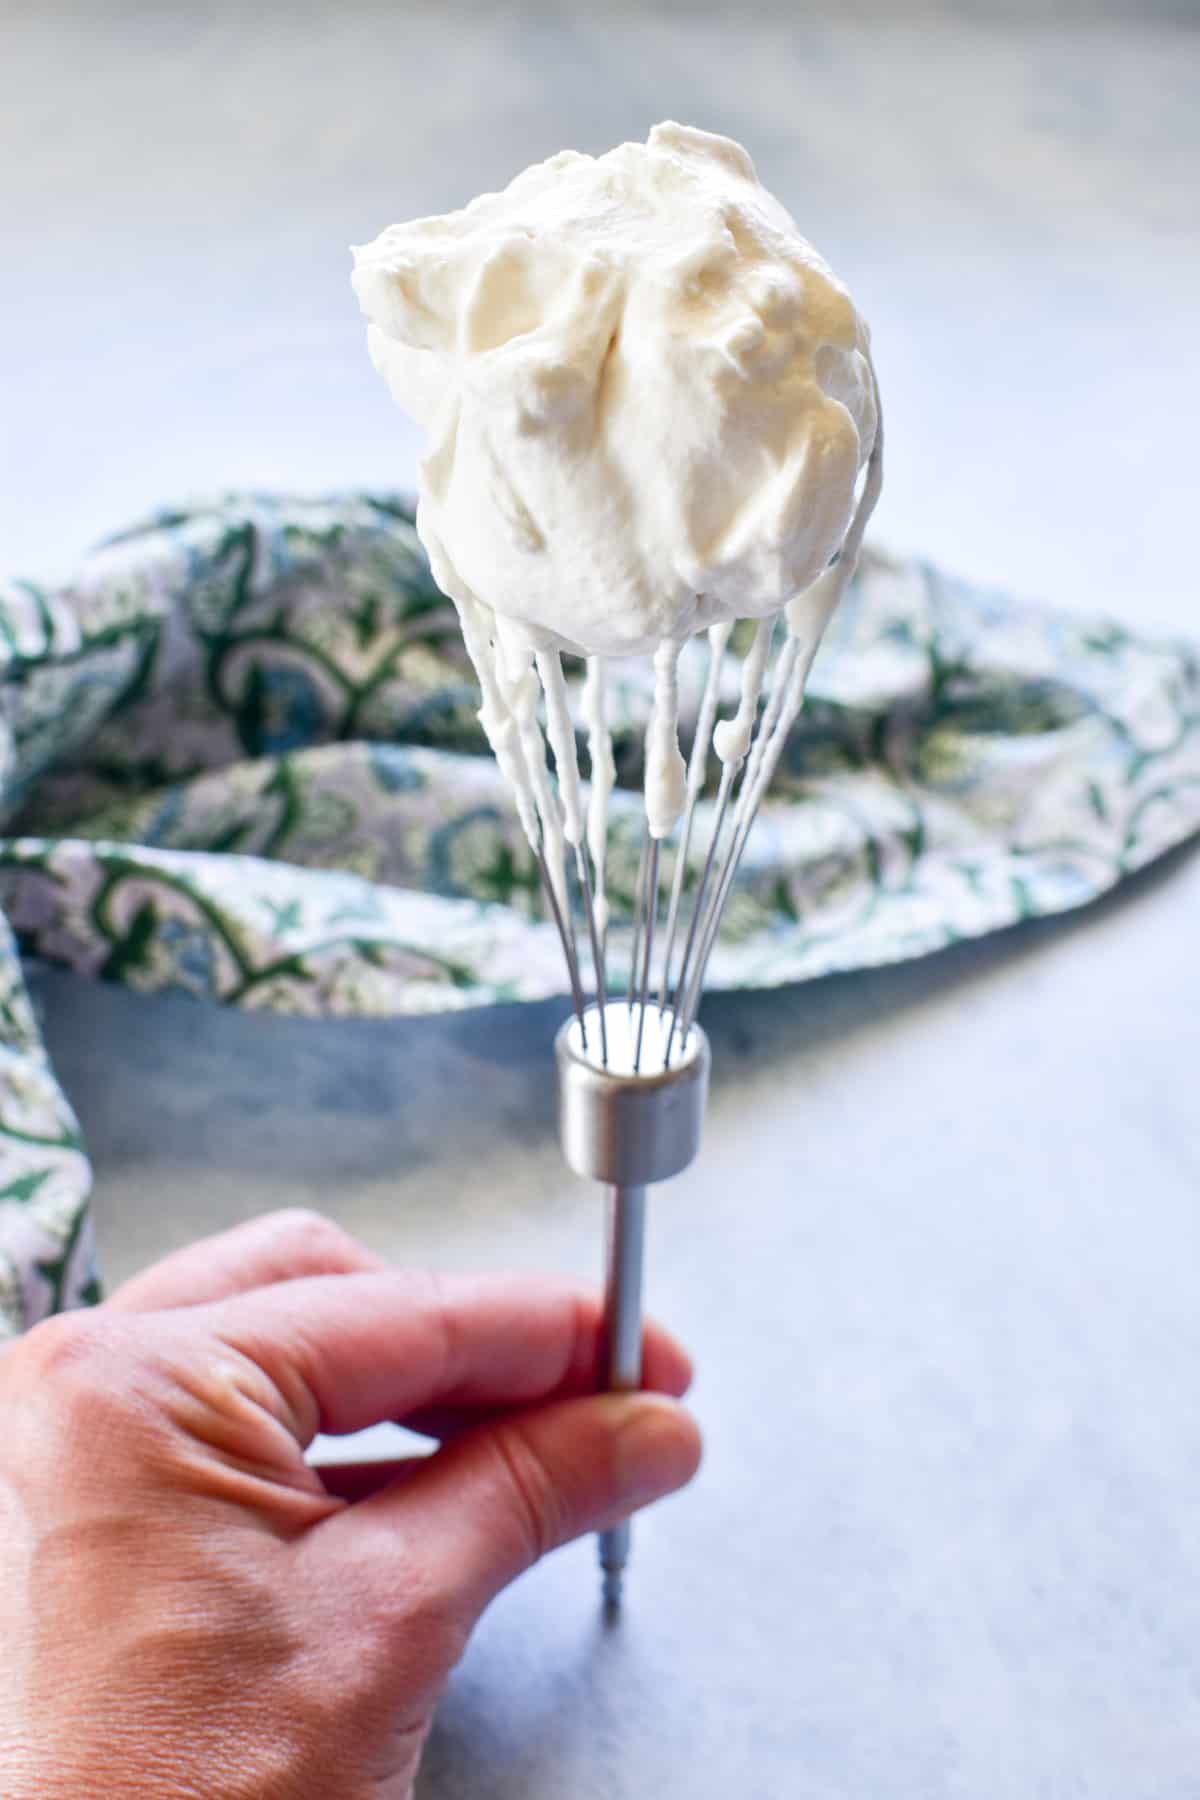 Homemade Cool Whip on a whisk